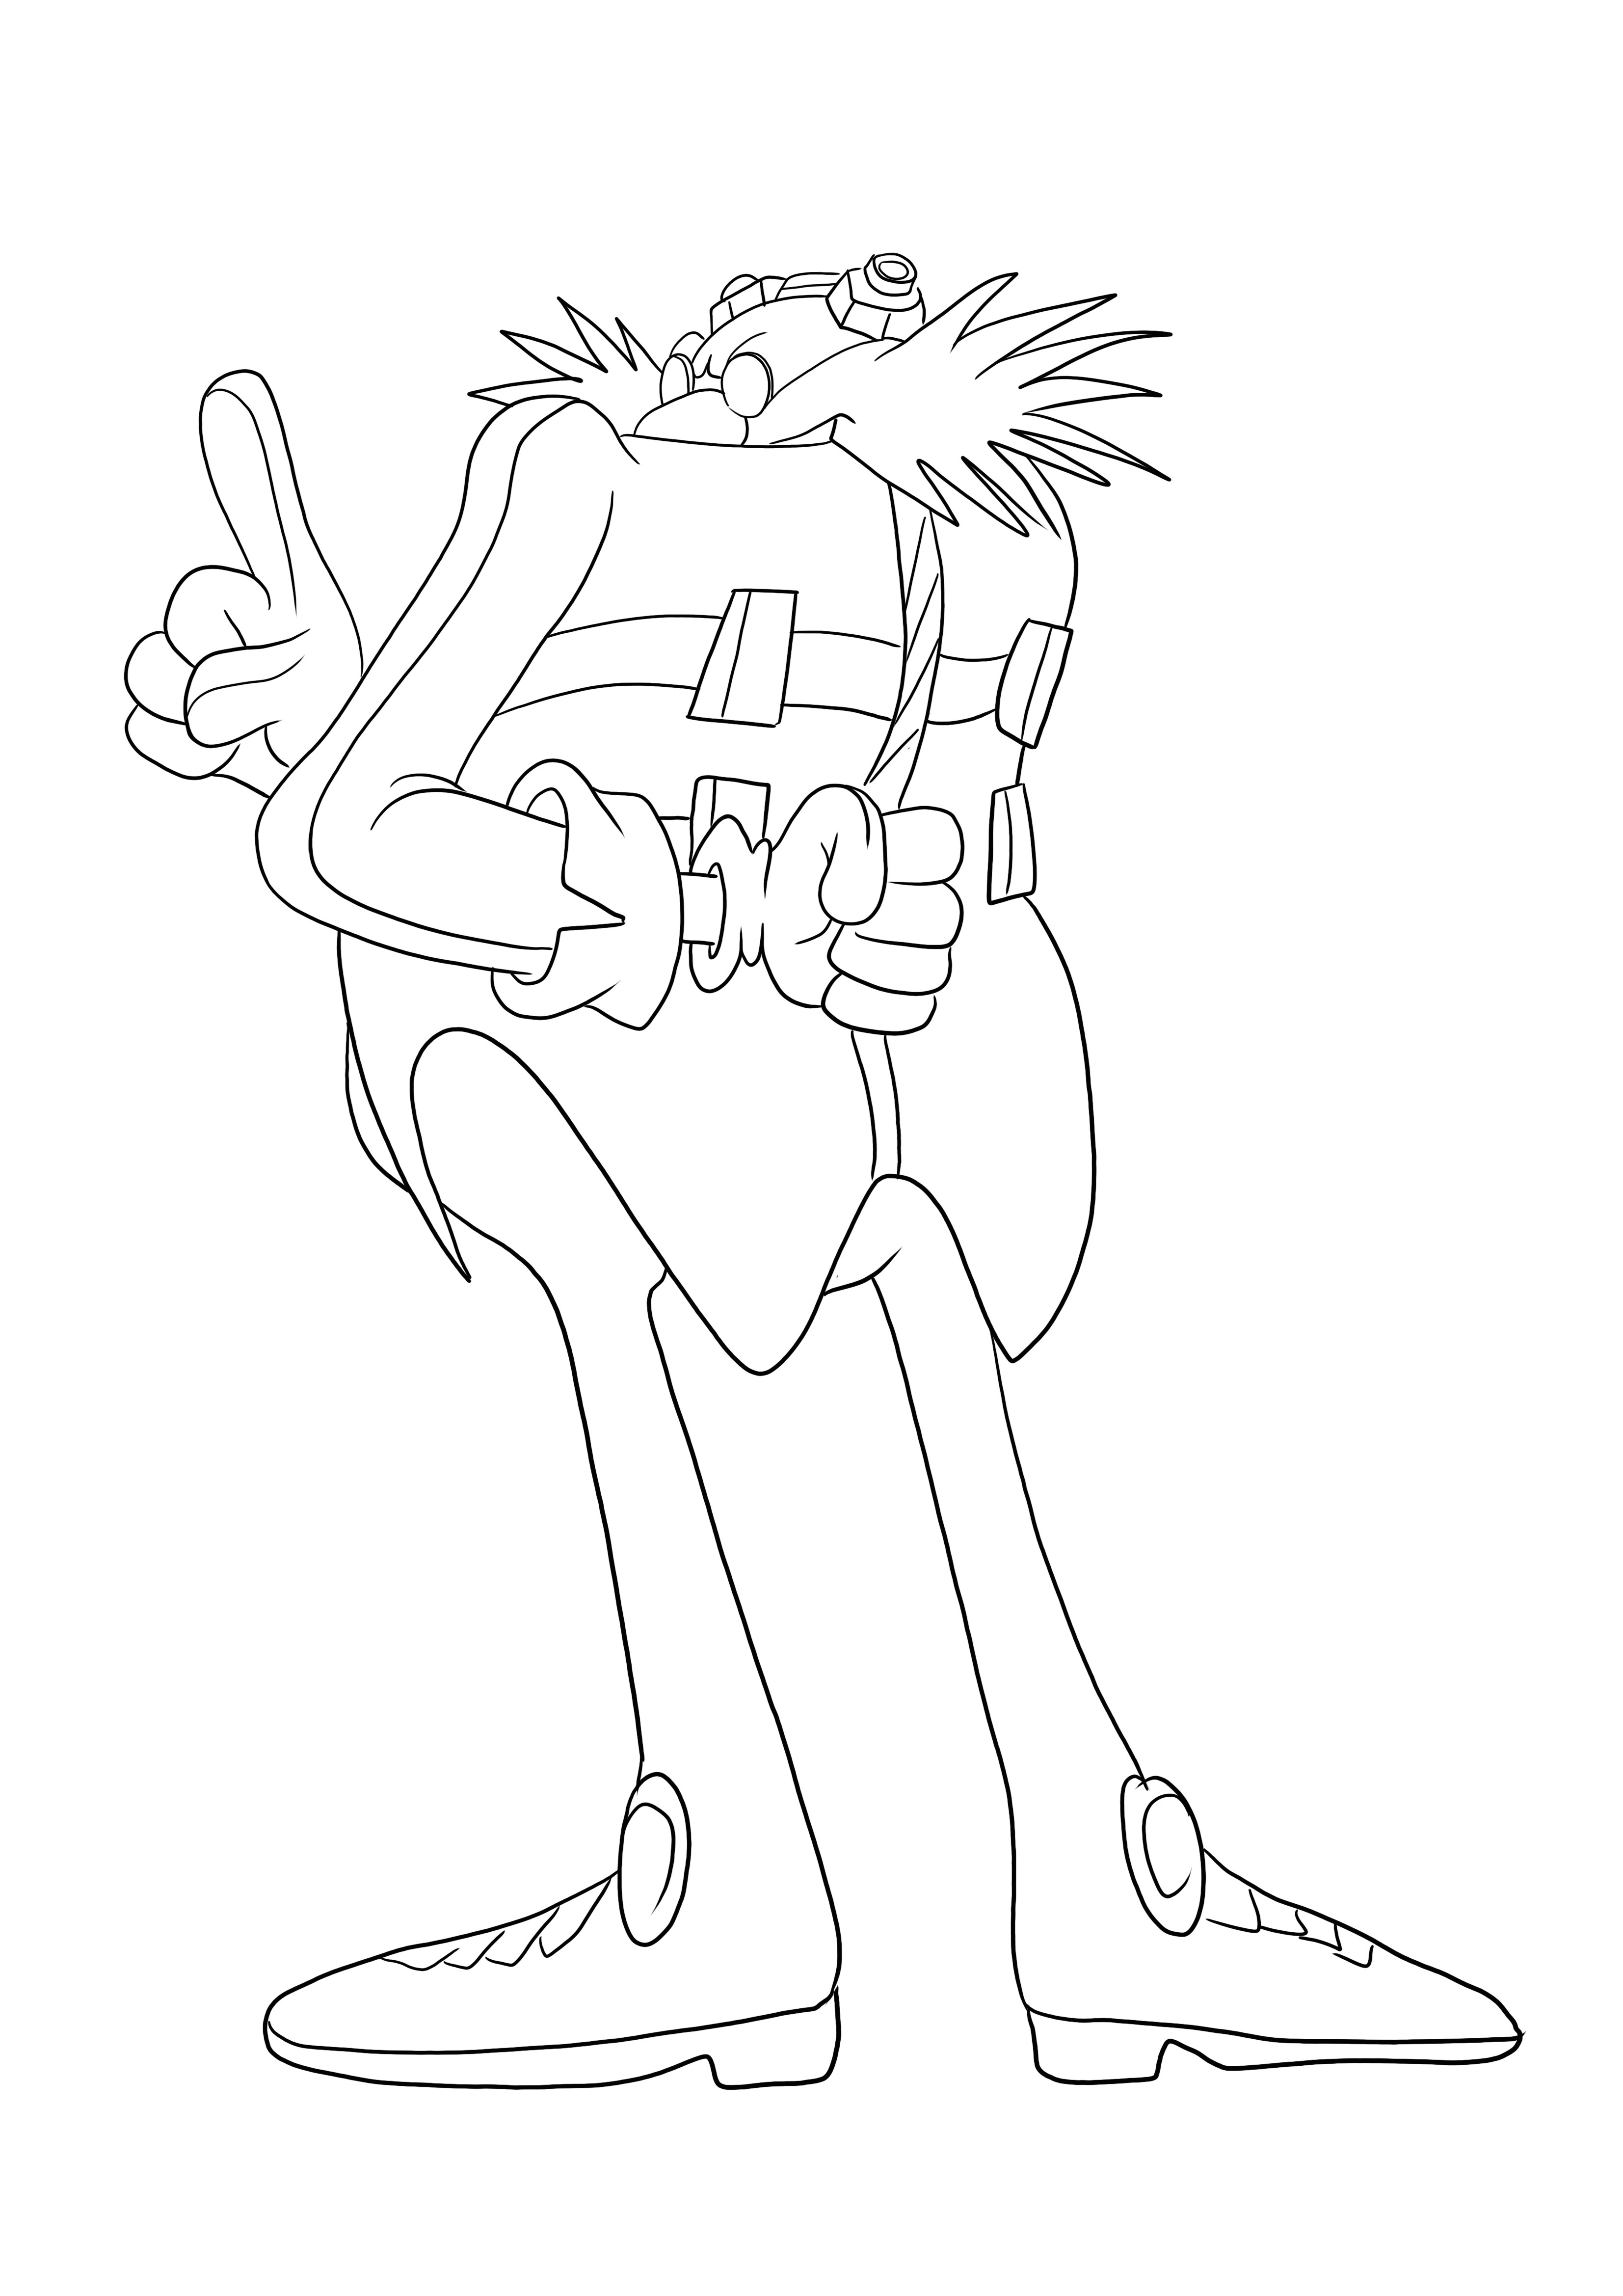 Here is Dr Eggman from the Sonic series free to print and easy to color